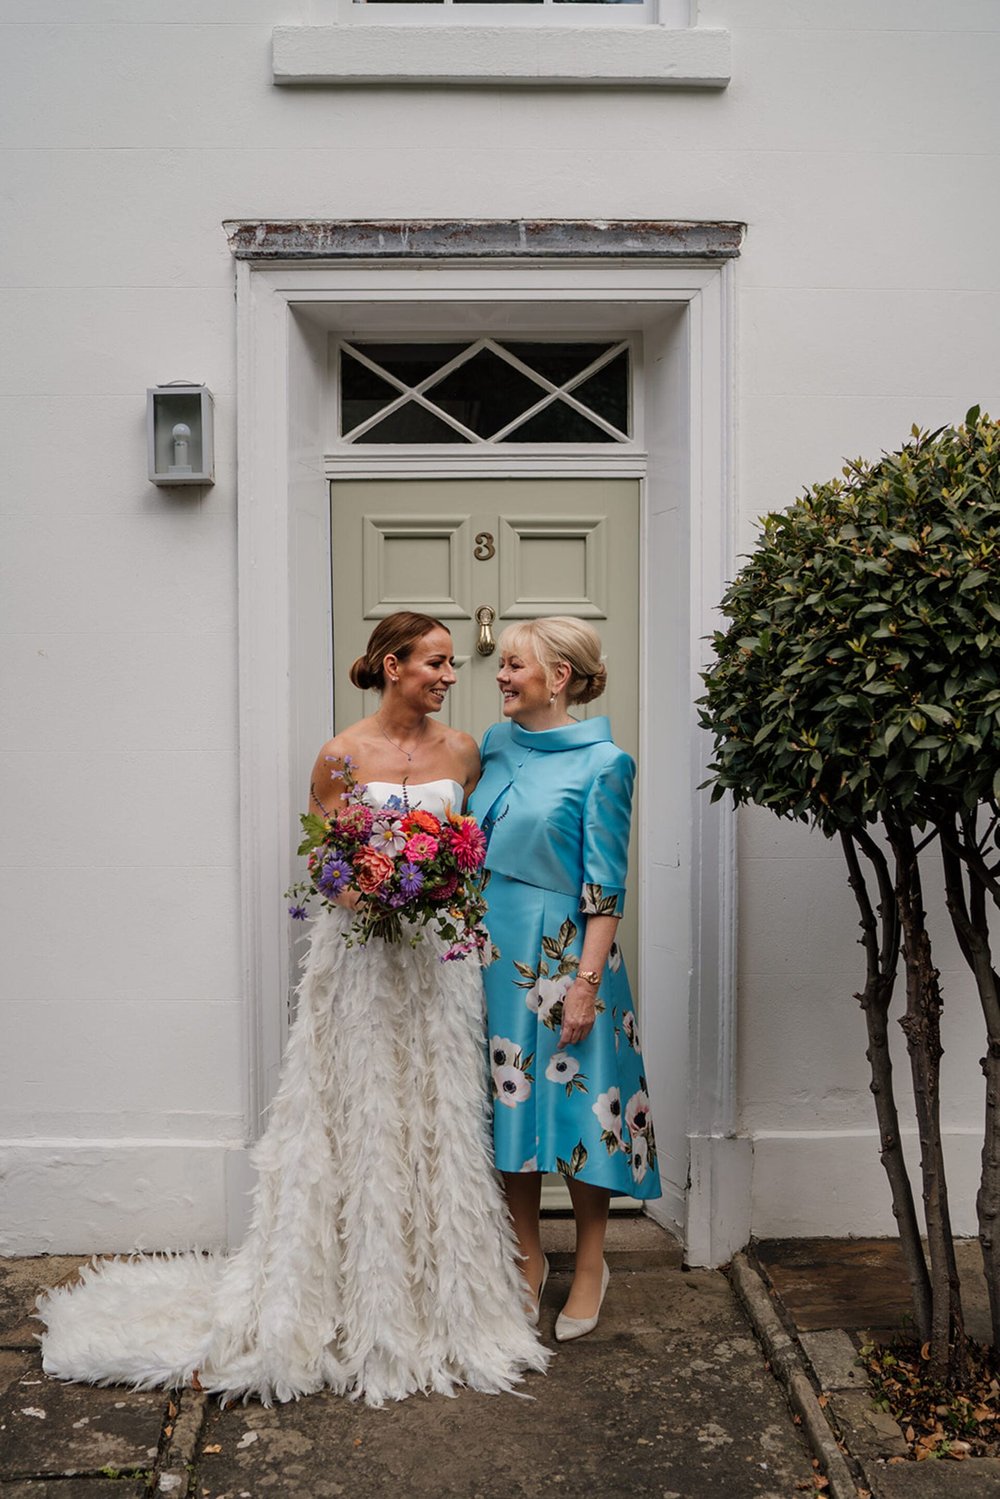  Sophie and her mum stand in front of a doorway of a white Georgian style house. Her mum wears a blue dress with large white flowers, and a high neck satin, 3/4 sleeve blue jacket. 